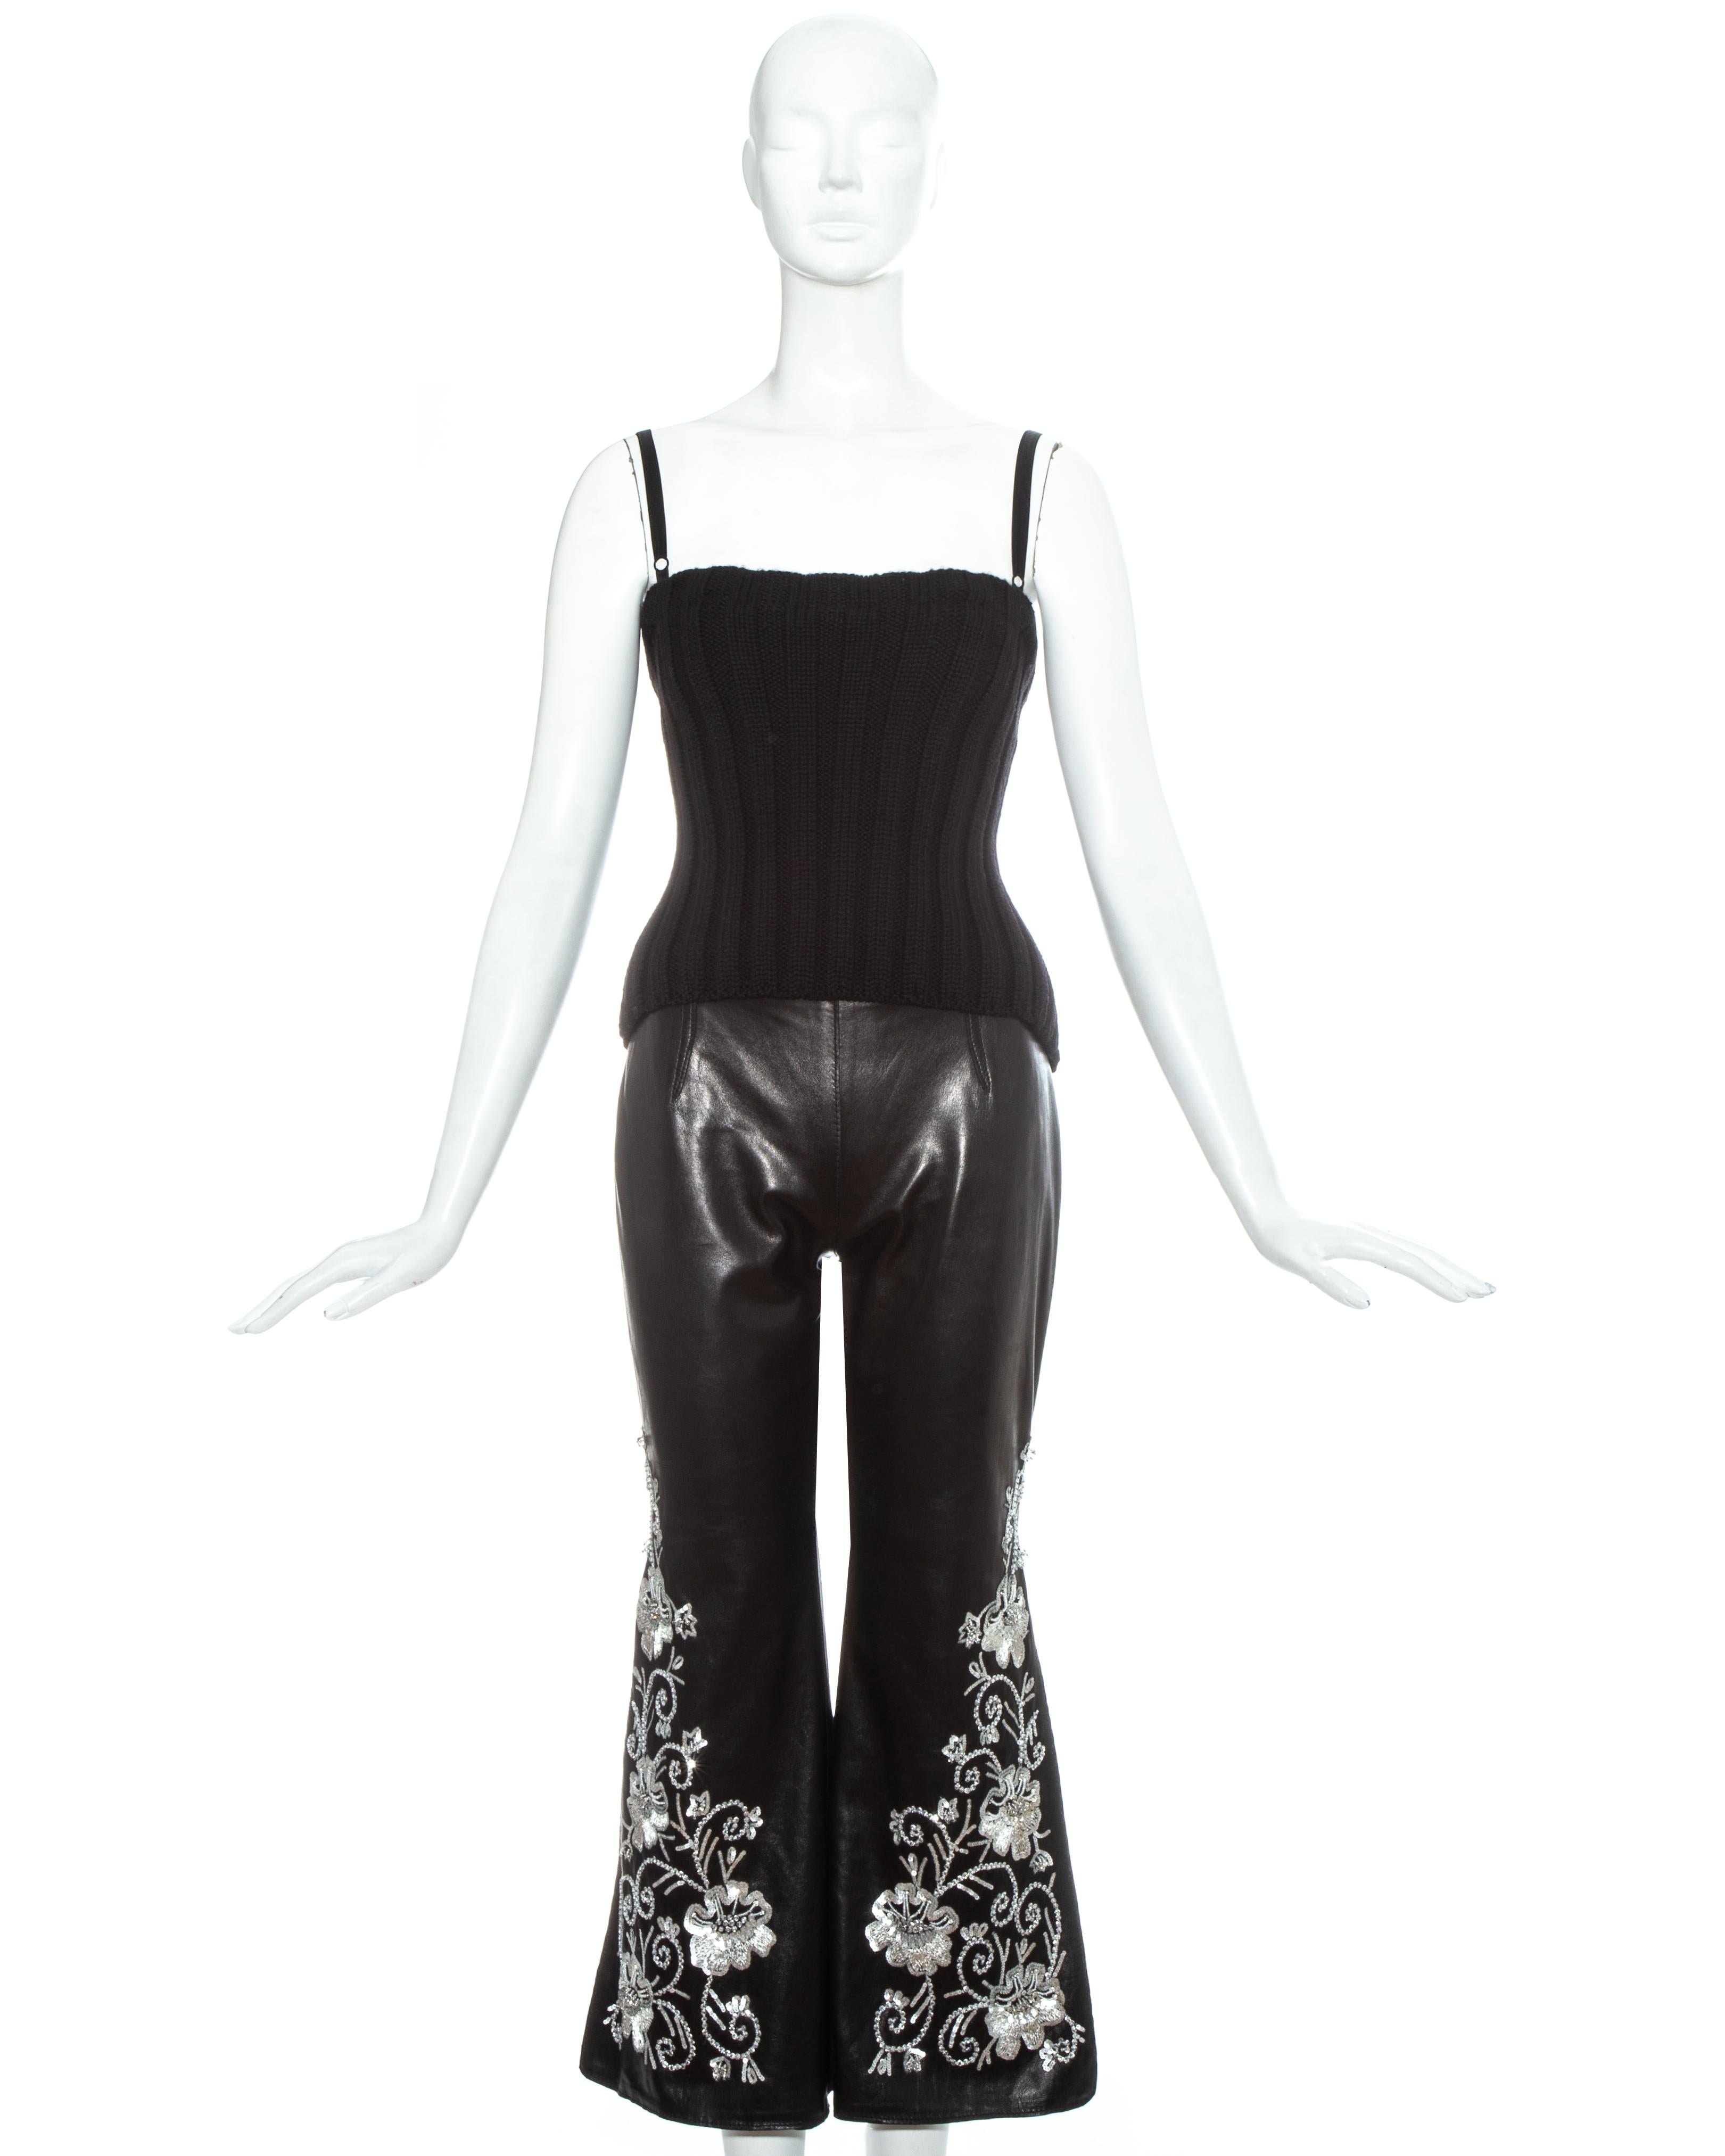 Dolce & Gabbana black leather culottes with silver floral embroidery and black ribbed wool backless corset top with built-in bra

Fall-Winter 1999